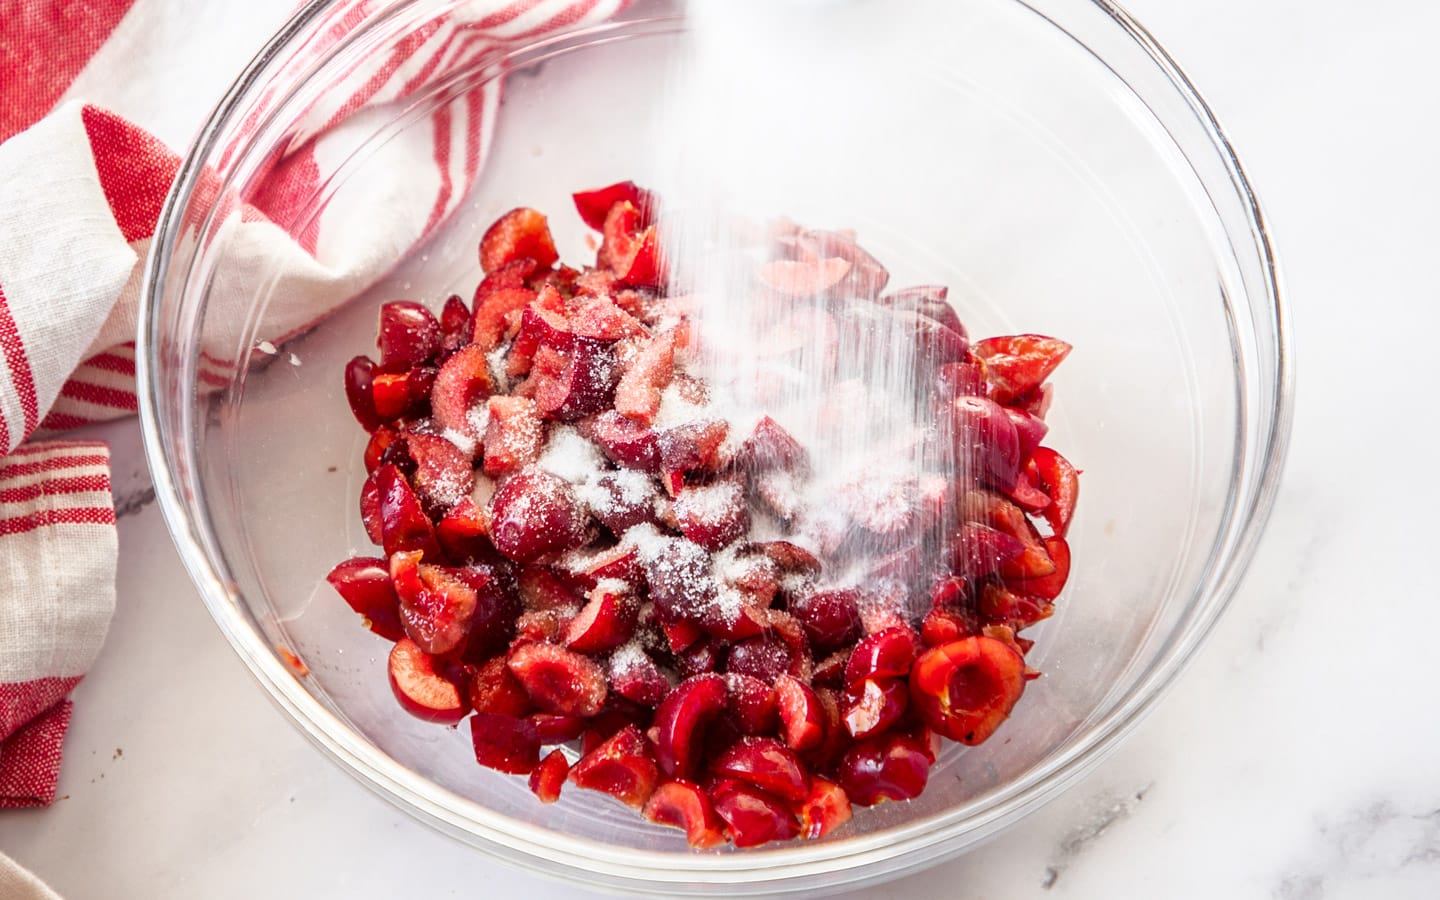 Sugar being poured over fresh cherries in a bowl.